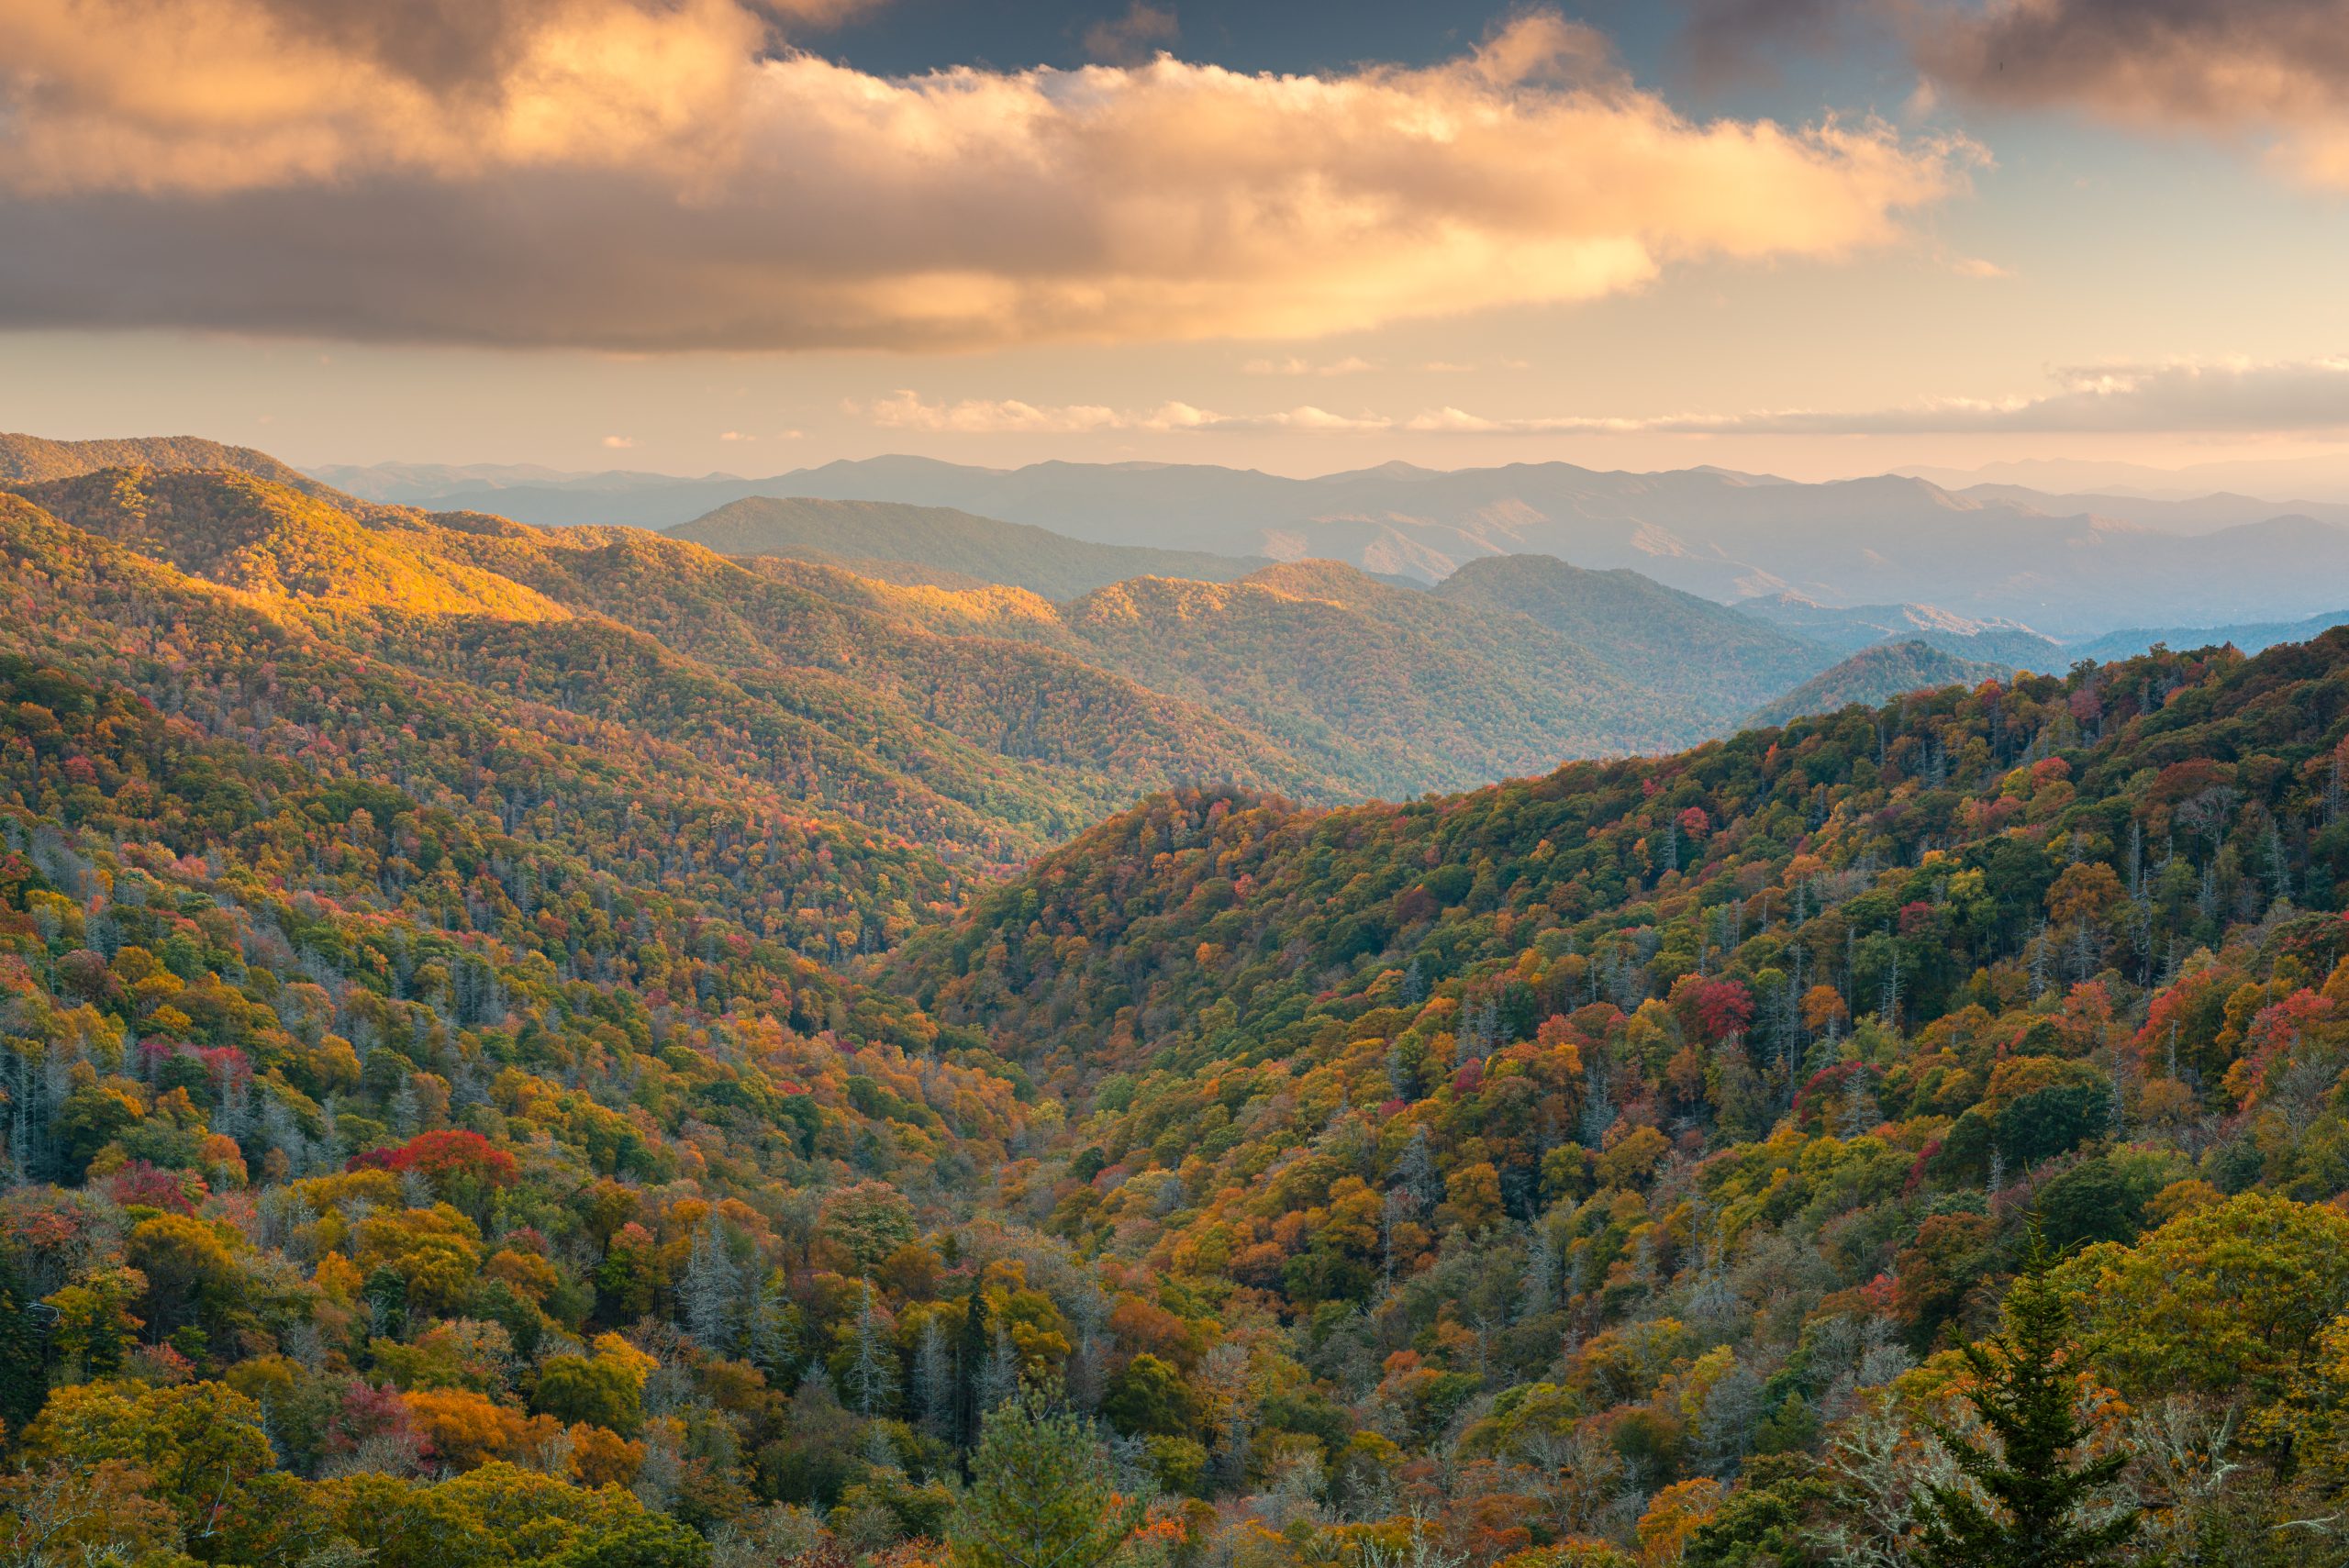 The Great Smoky Mountains in the Appalachian chain